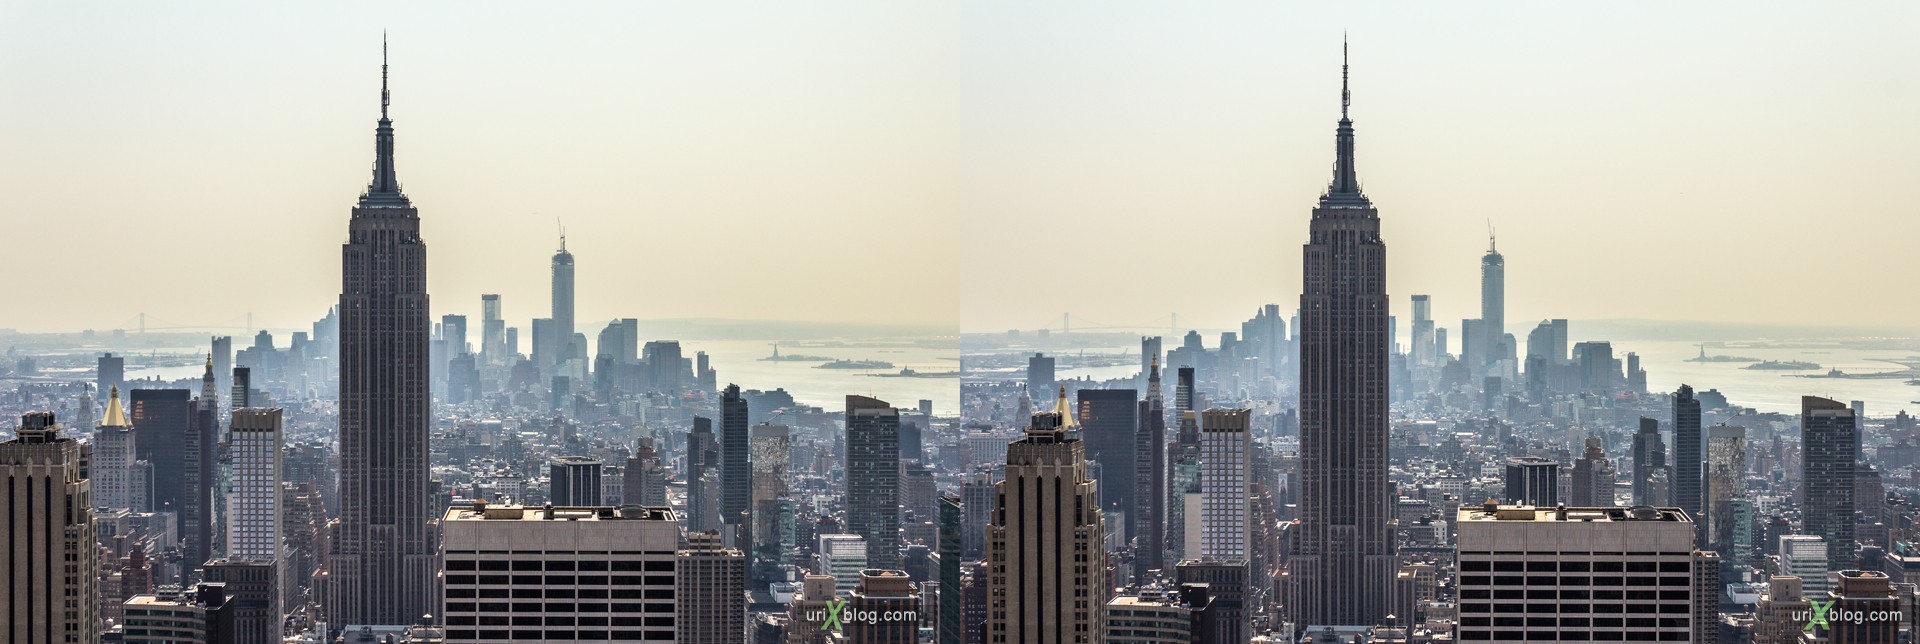 2013, NYC, New York, Lower Manhattan, Empire State Building, Top of the Rock Observation Deck, Rockefeller Canter, view from the top, city, building, skyscraper, panorama, 3D, stereo pair, cross-eyed, crossview, cross view stereo pair, stereoscopic